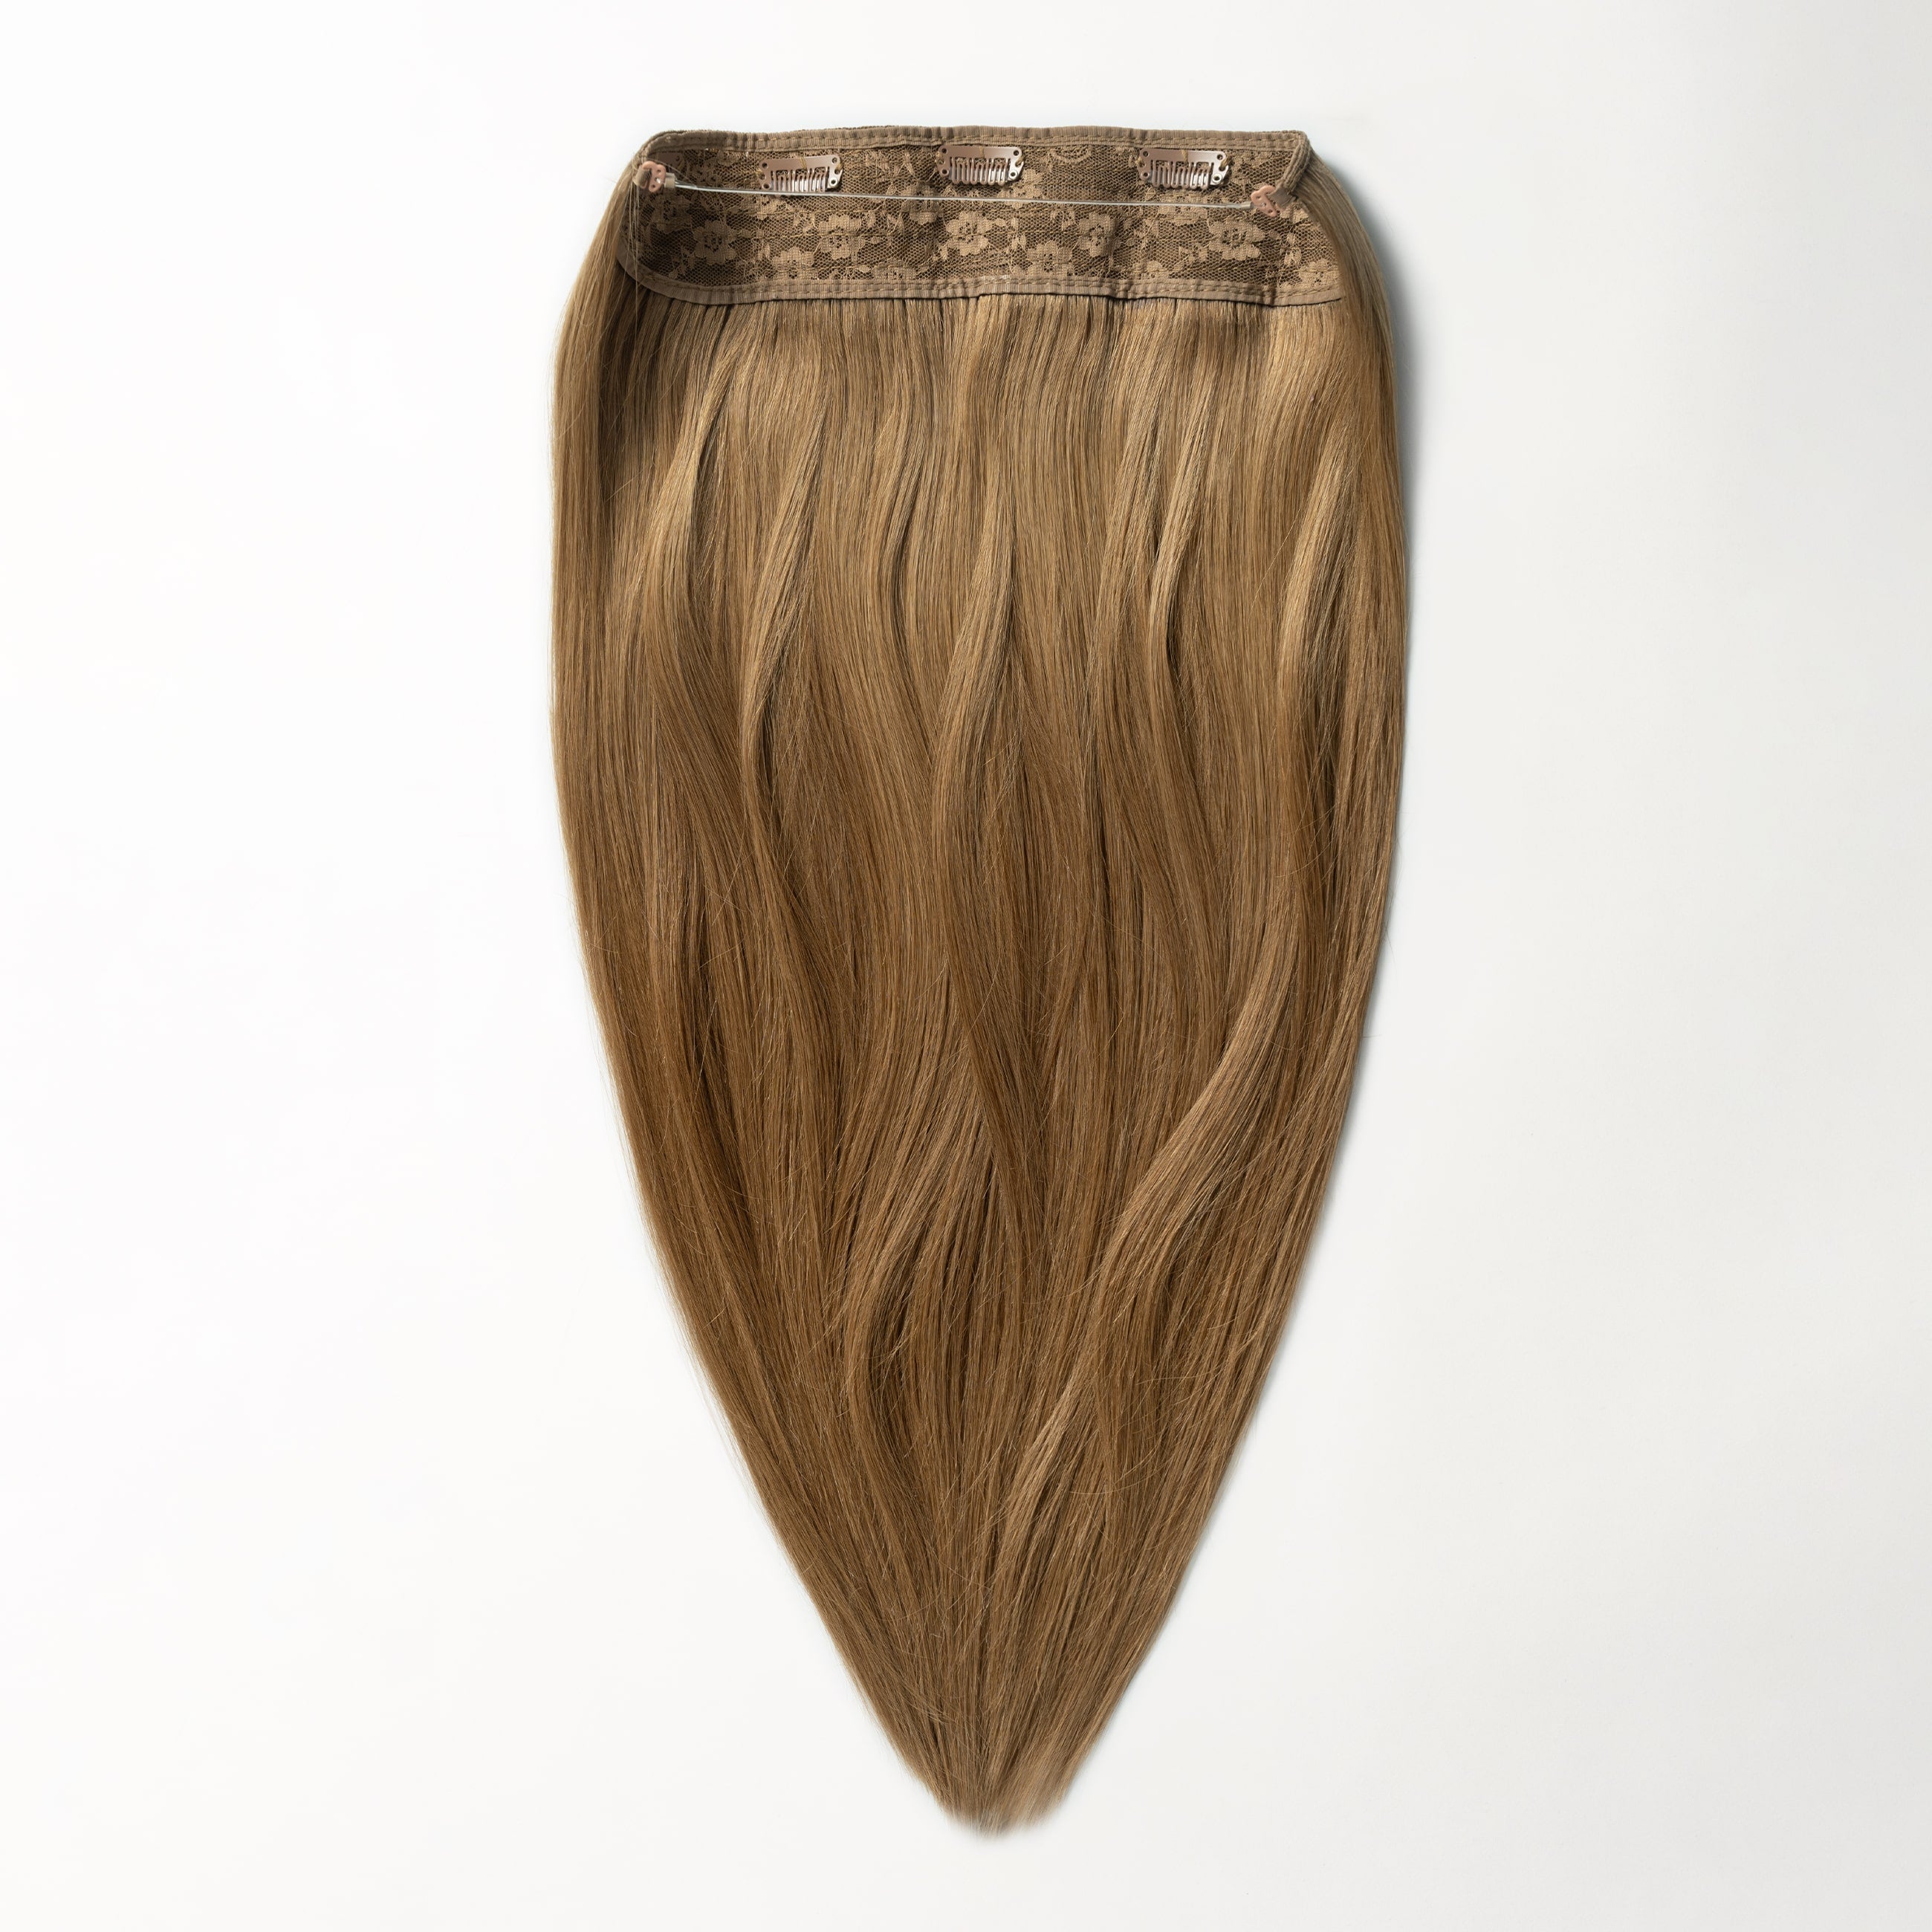 Halo extensions - Light Natural Brown 5